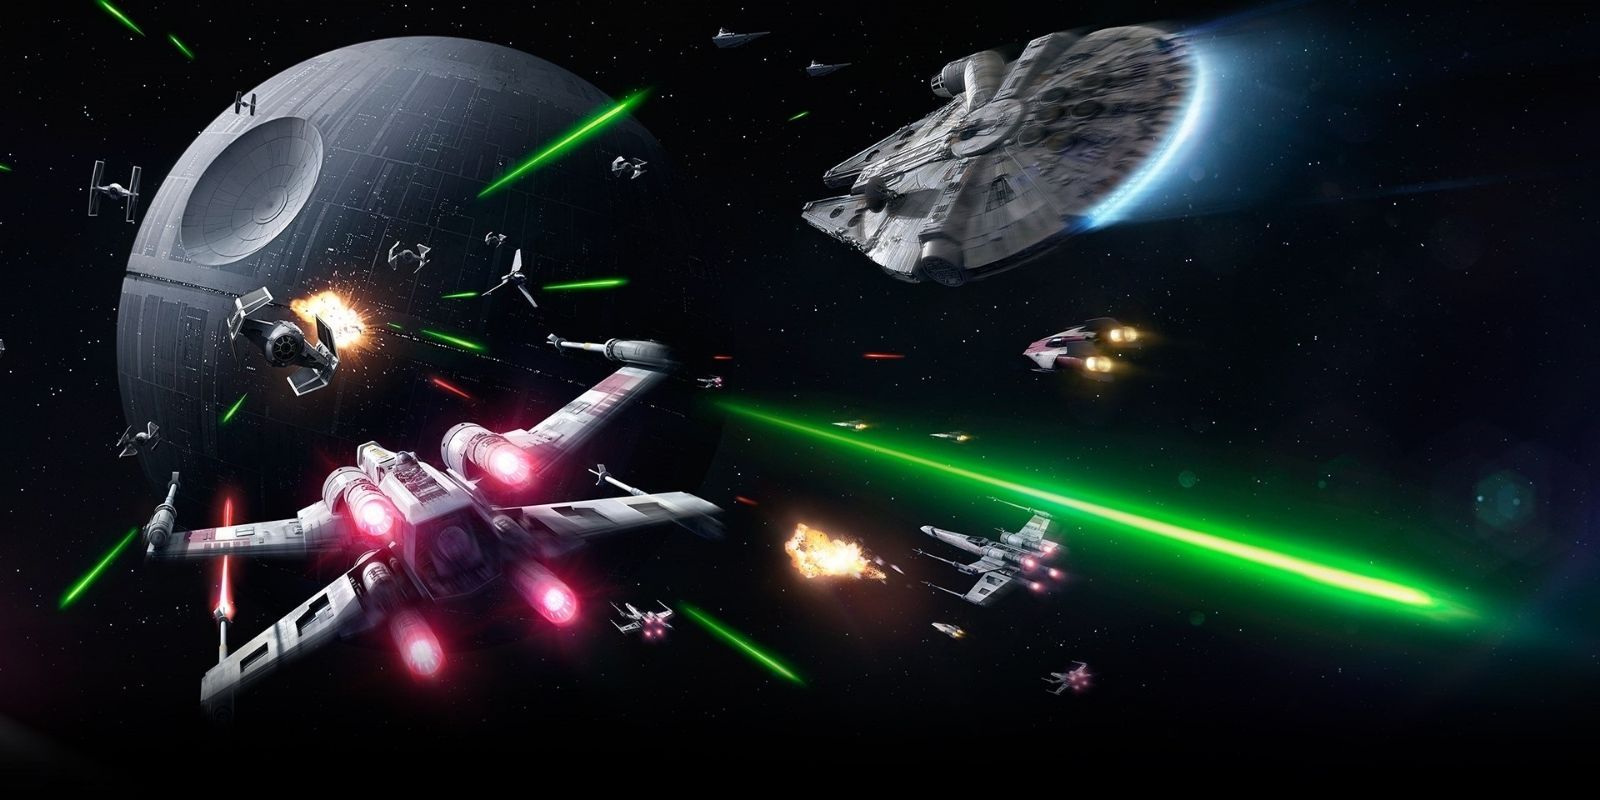 An epic space battle between the Rebels and the Empire, the Death Star looming in the distance, in Star Wars